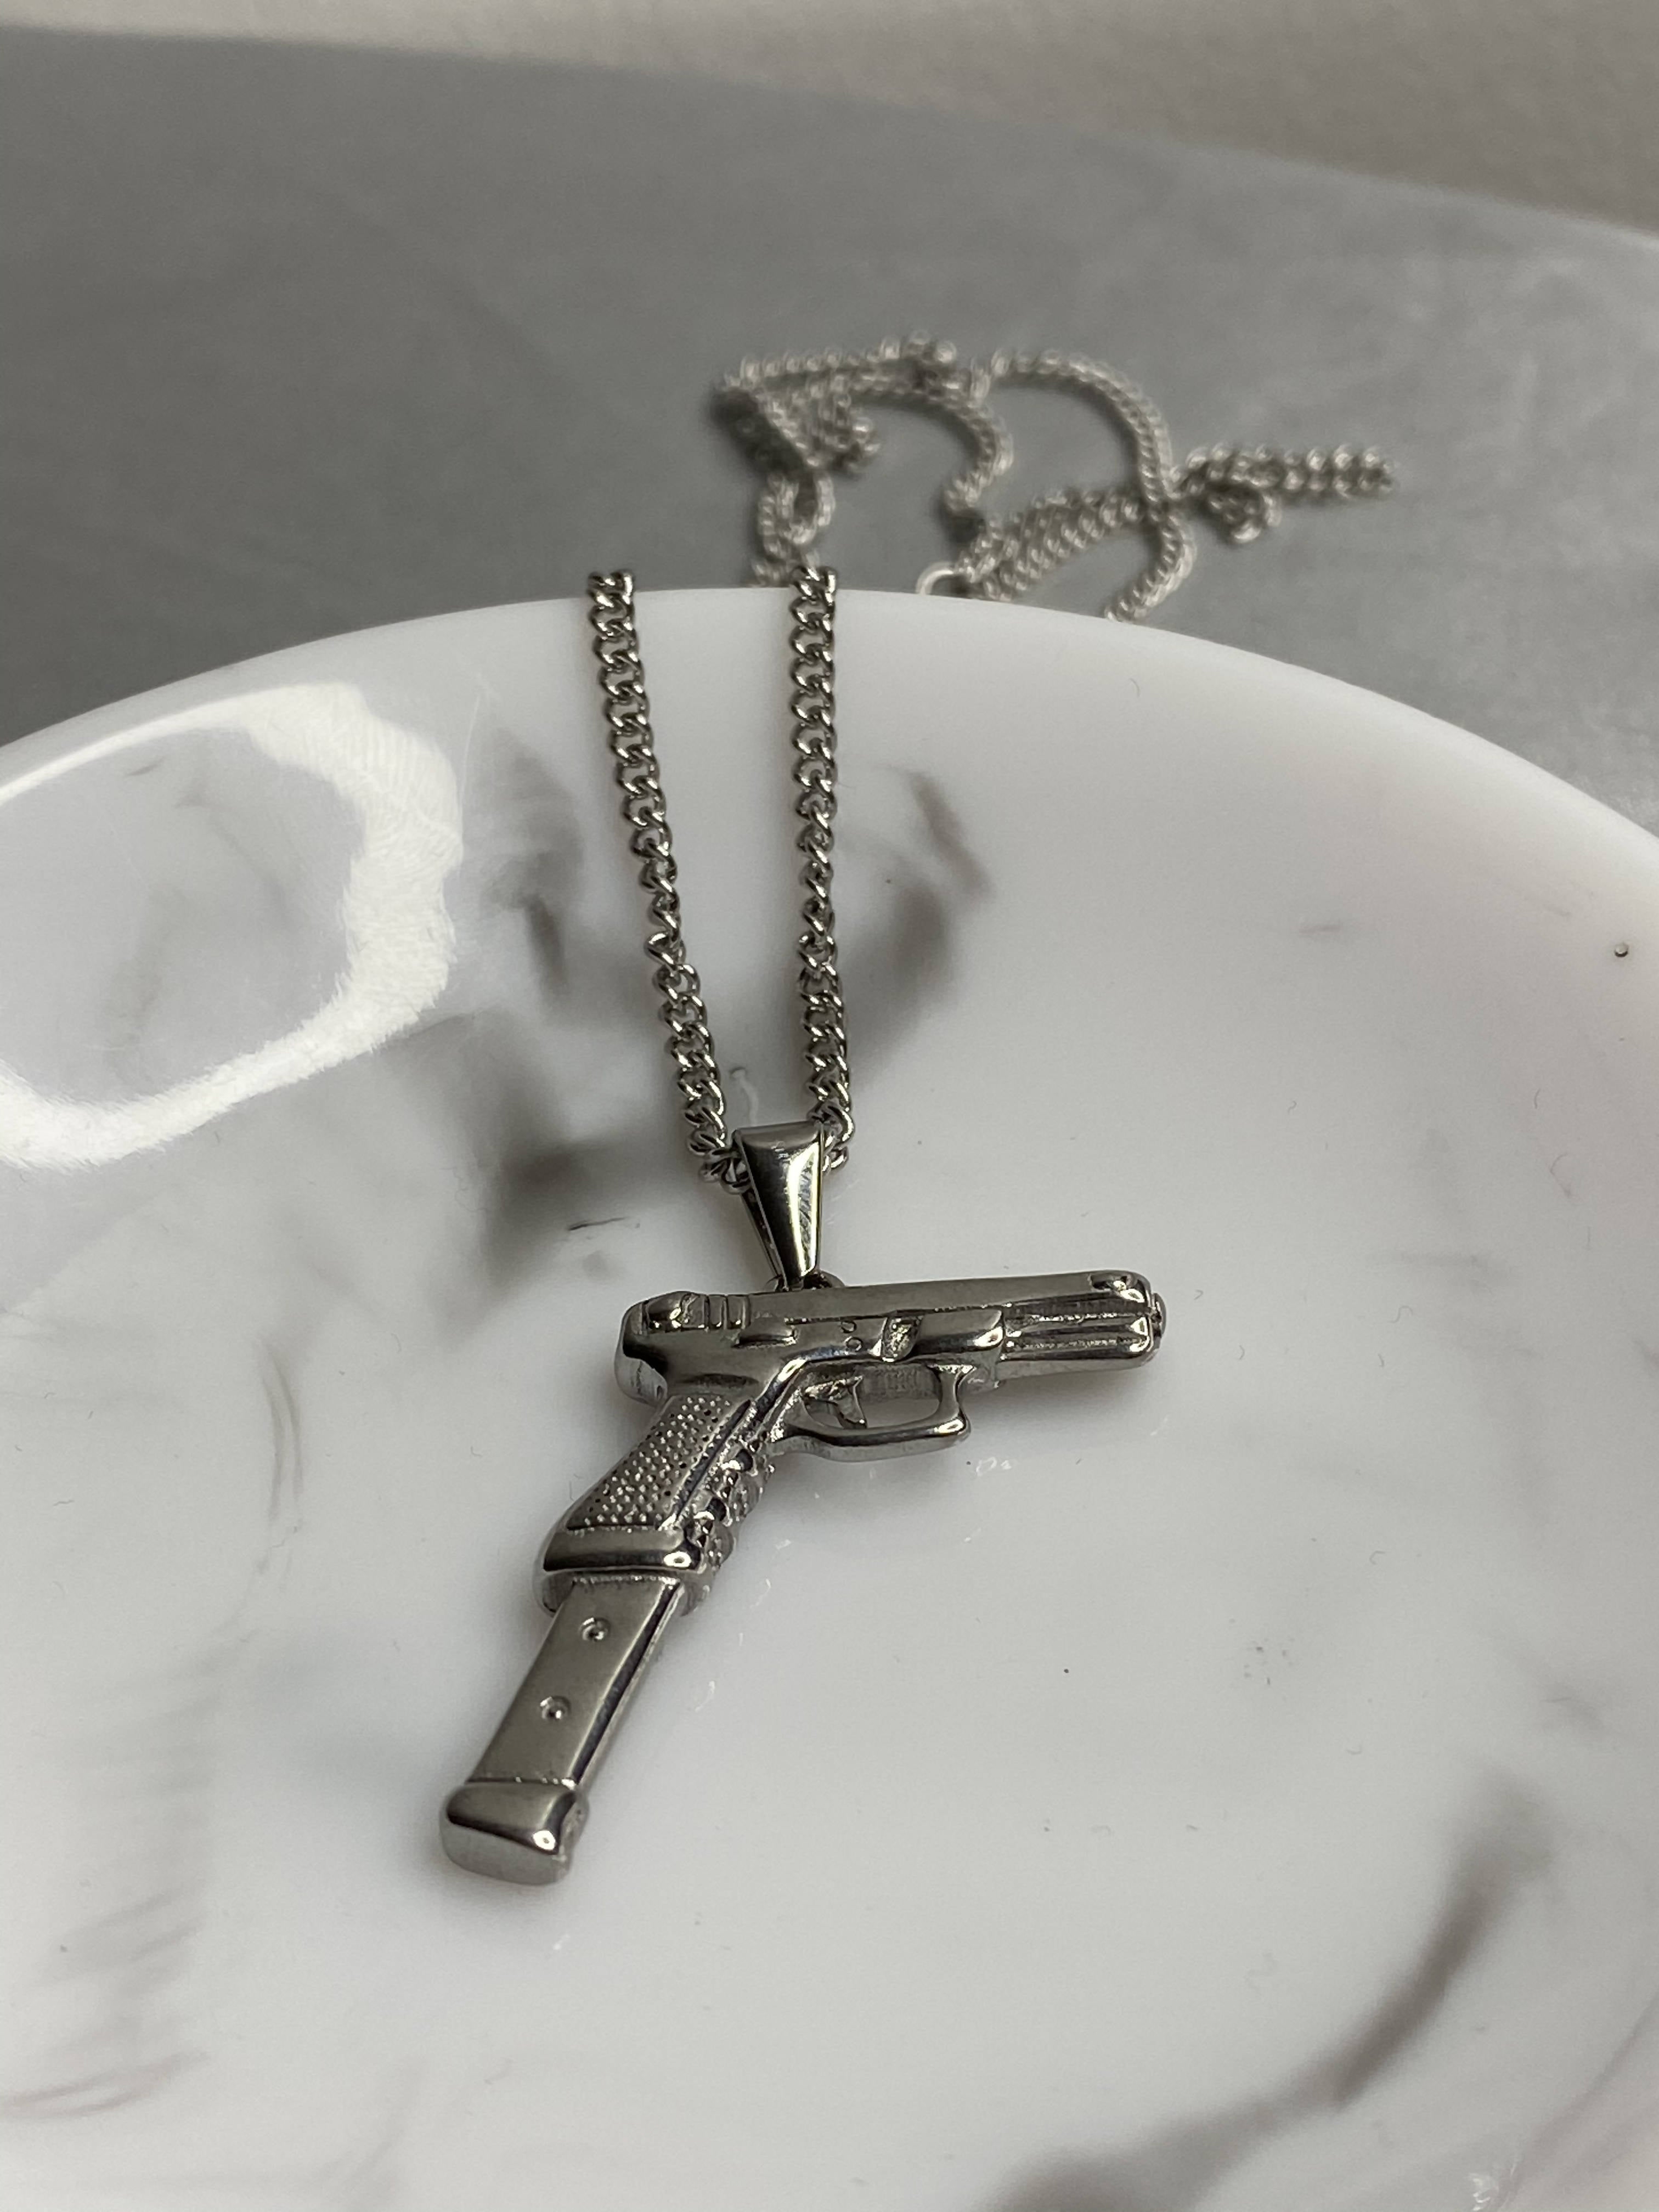 EXTENDED MAG PISTOL NECKLACE